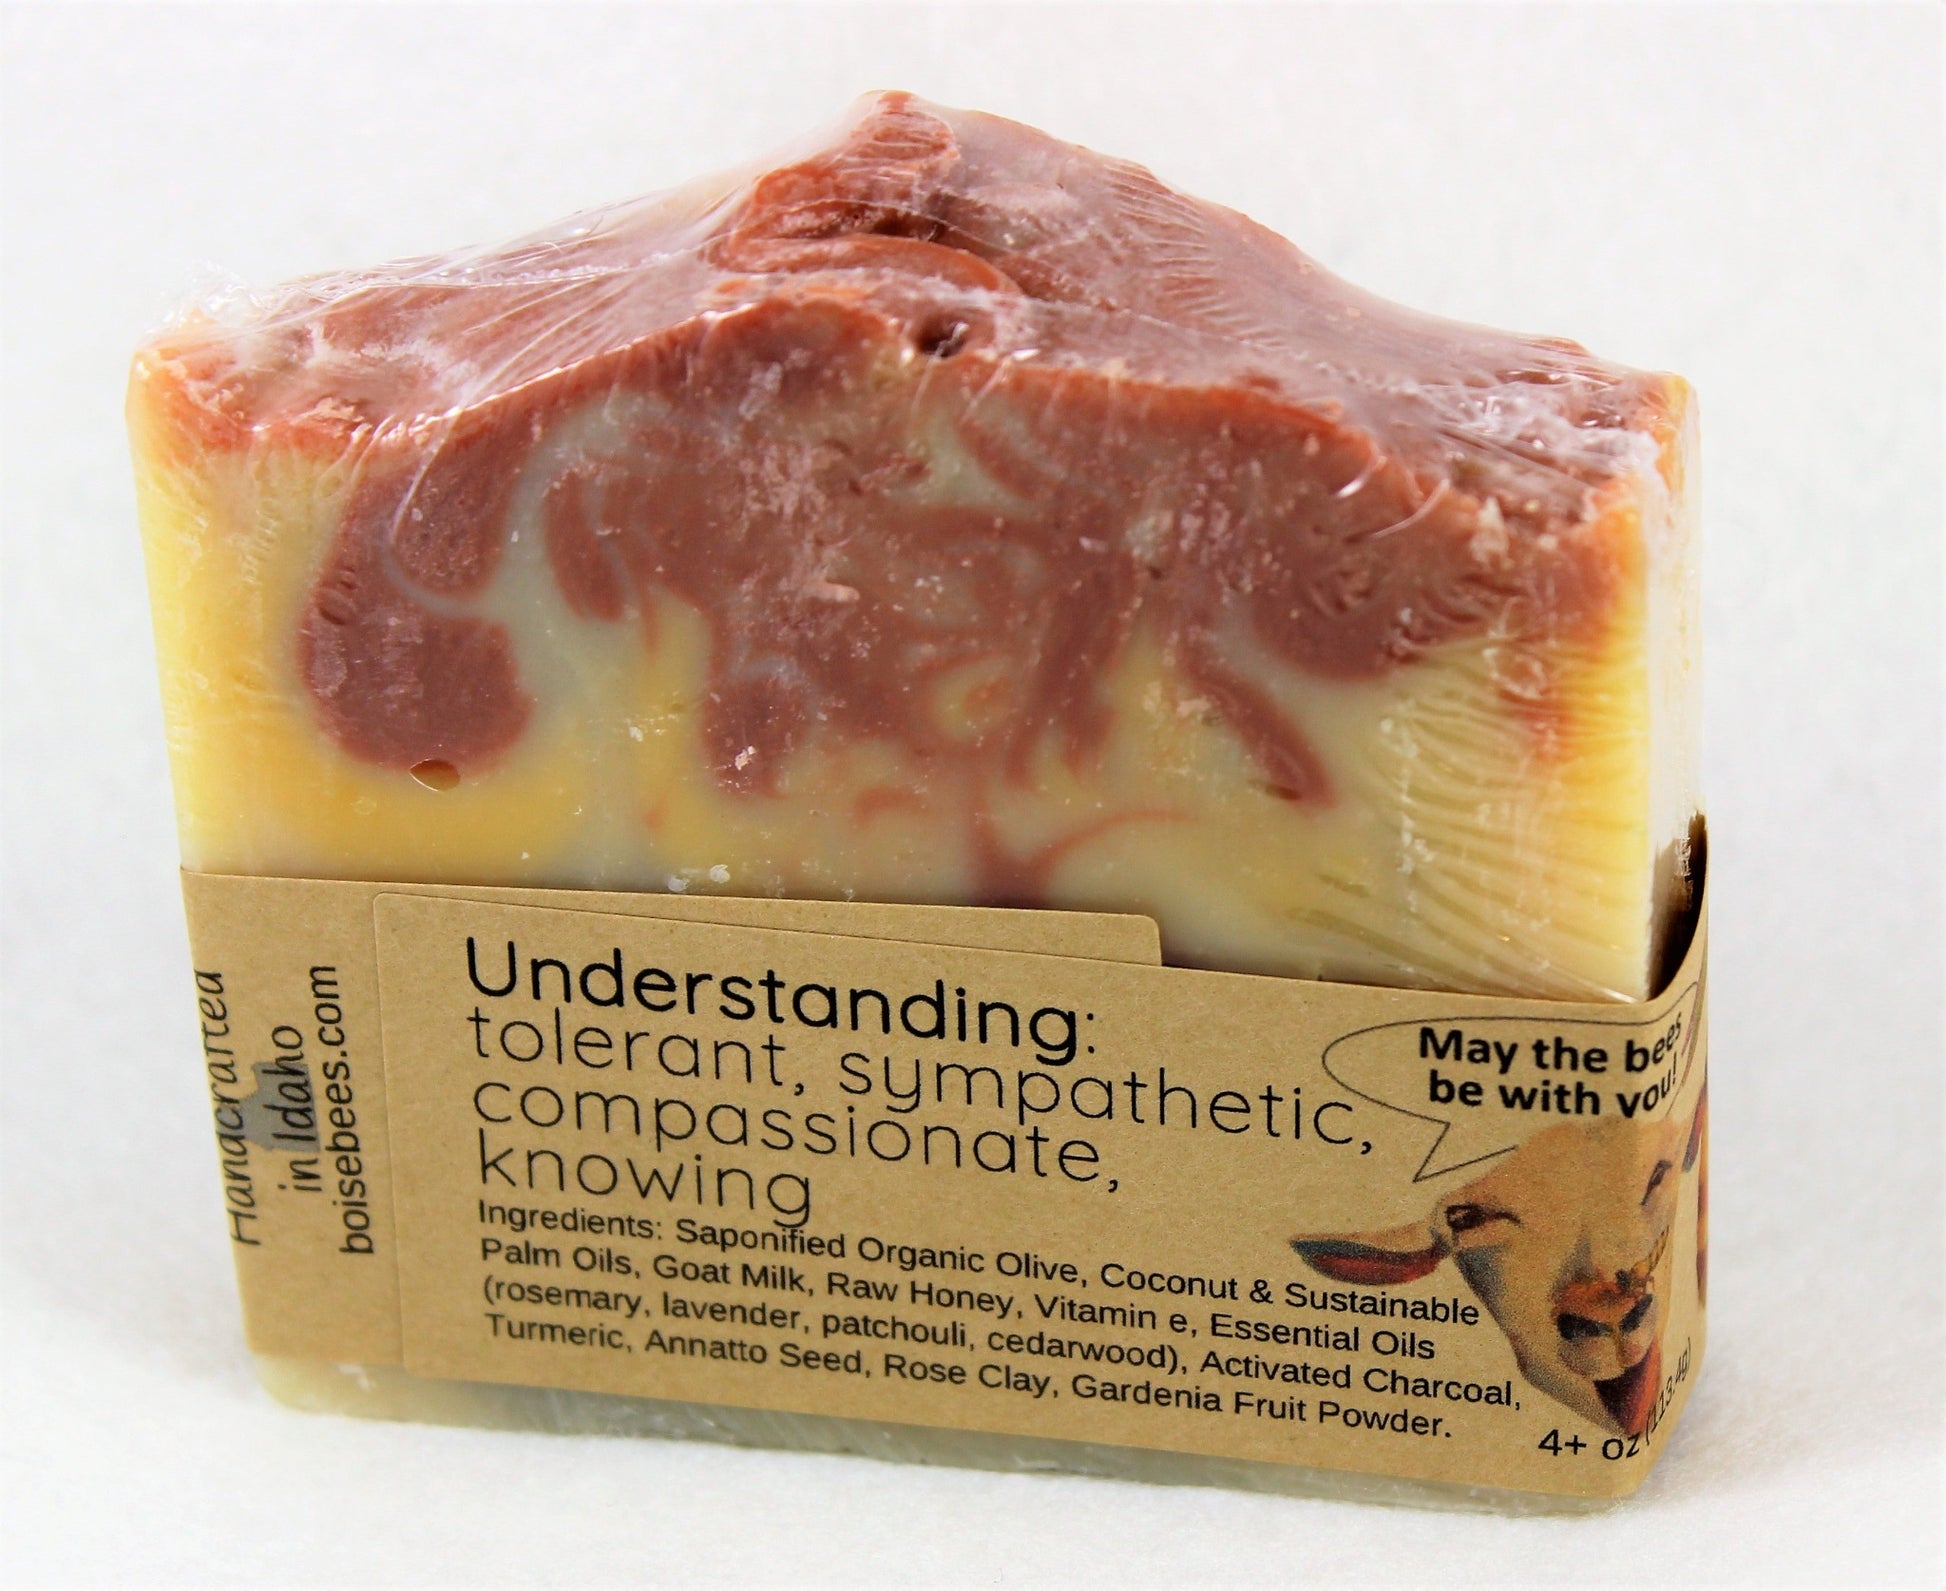 Rosemary, lavender, patchouli, cedarwood scented artisan soap